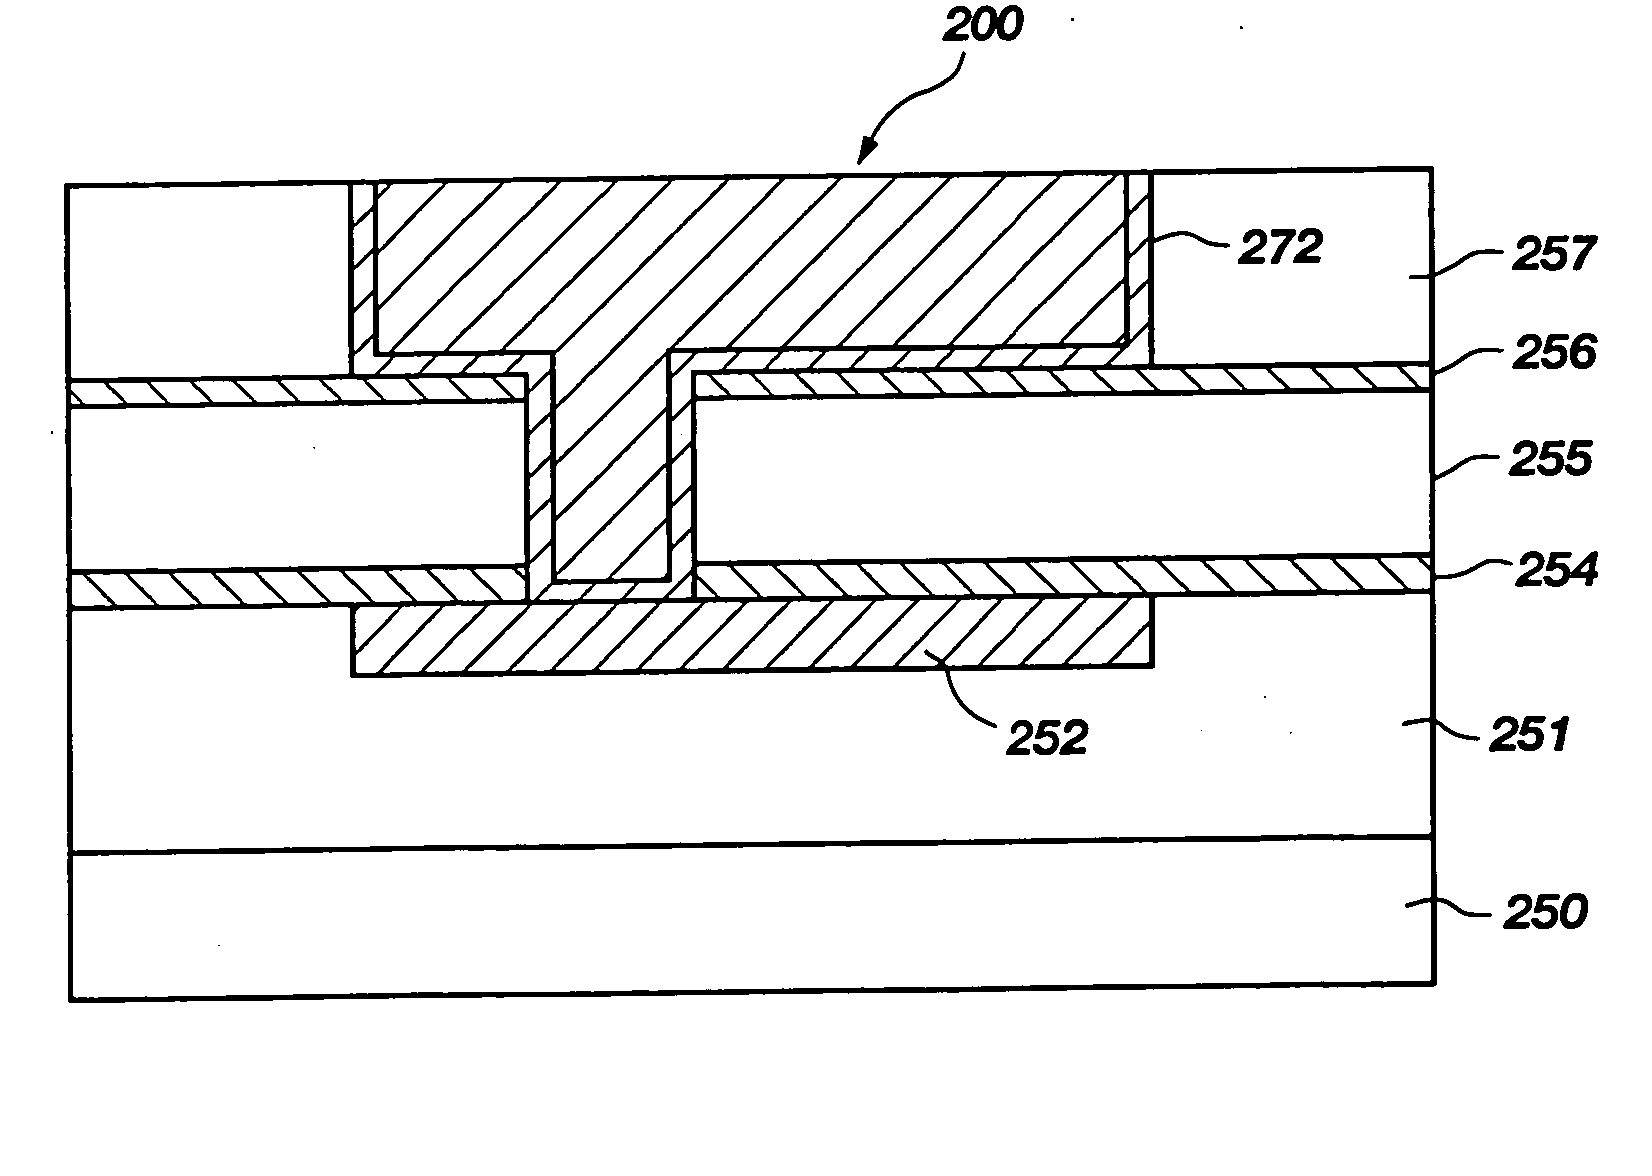 Methods for improving metal-to-metal contact in a via, devices made according to the methods, and systems including the same